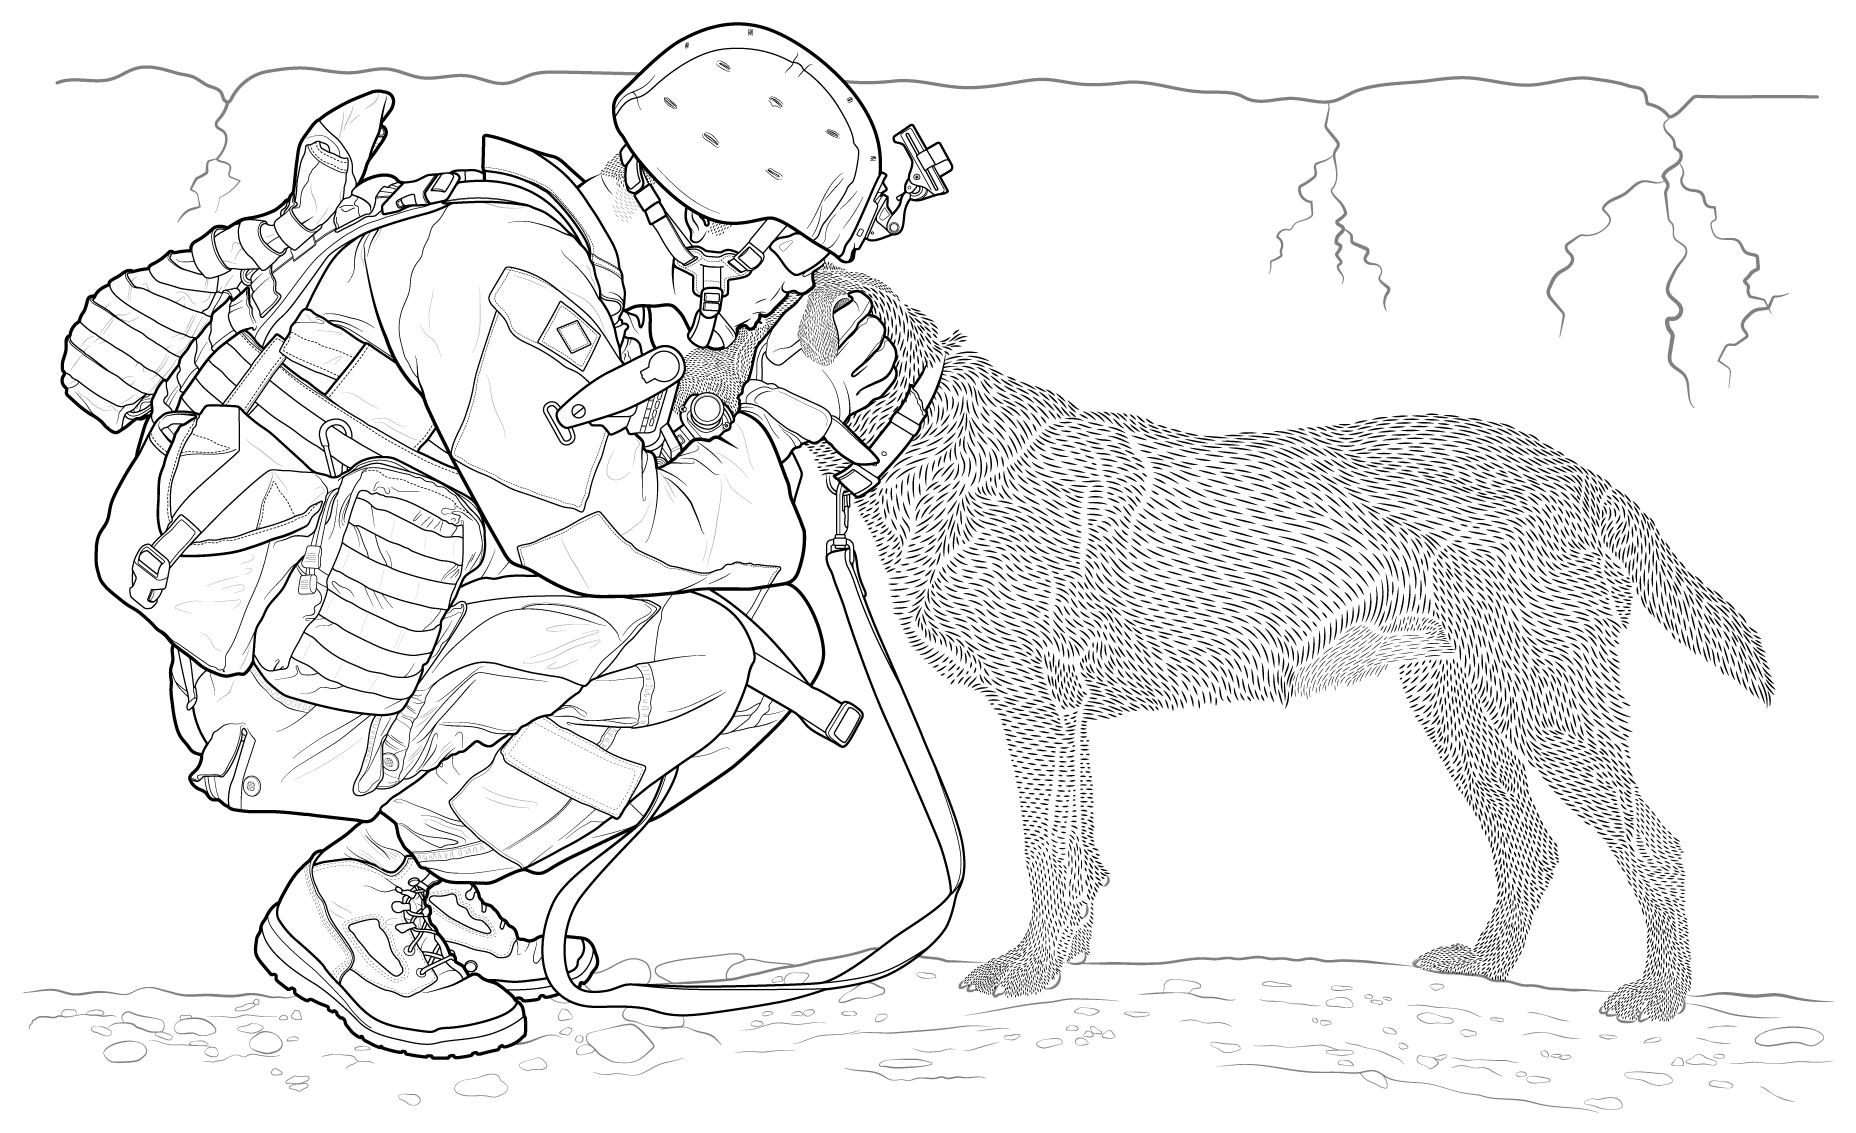 Illustration of soldier in full military field gear crouching down and kissing dog on forehead